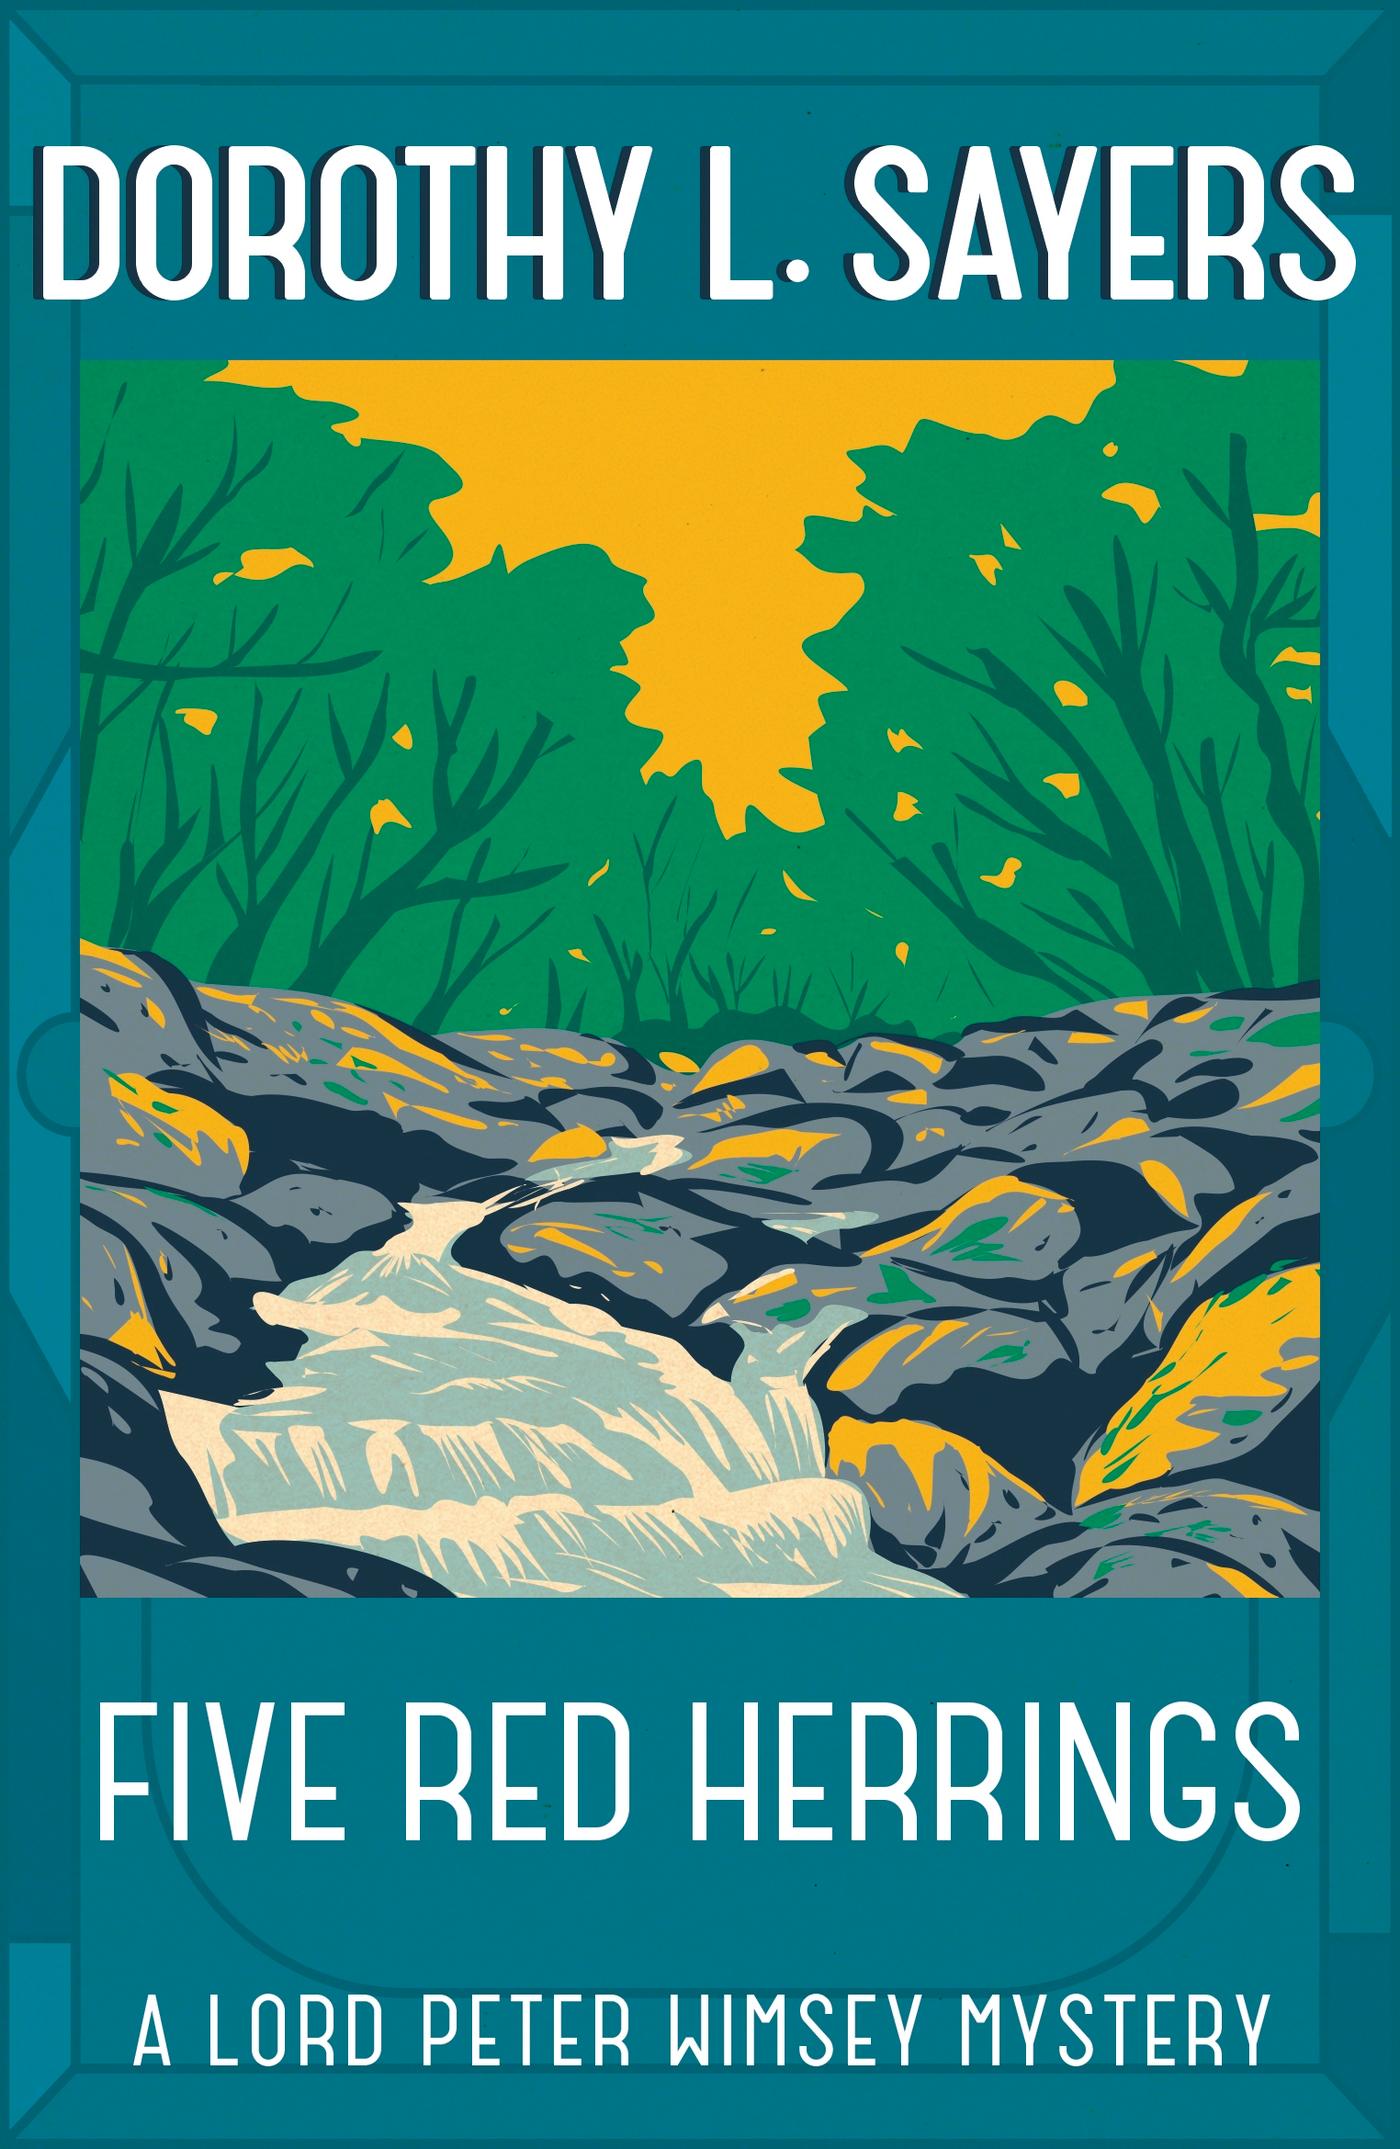 Five Red Herrings / A classic in detective fiction / Dorothy L Sayers / Taschenbuch / Lord Peter Wimsey Mysteries / 371 S. / Englisch / 2016 / Hodder & Stoughton / EAN 9781473621350 - Sayers, Dorothy L